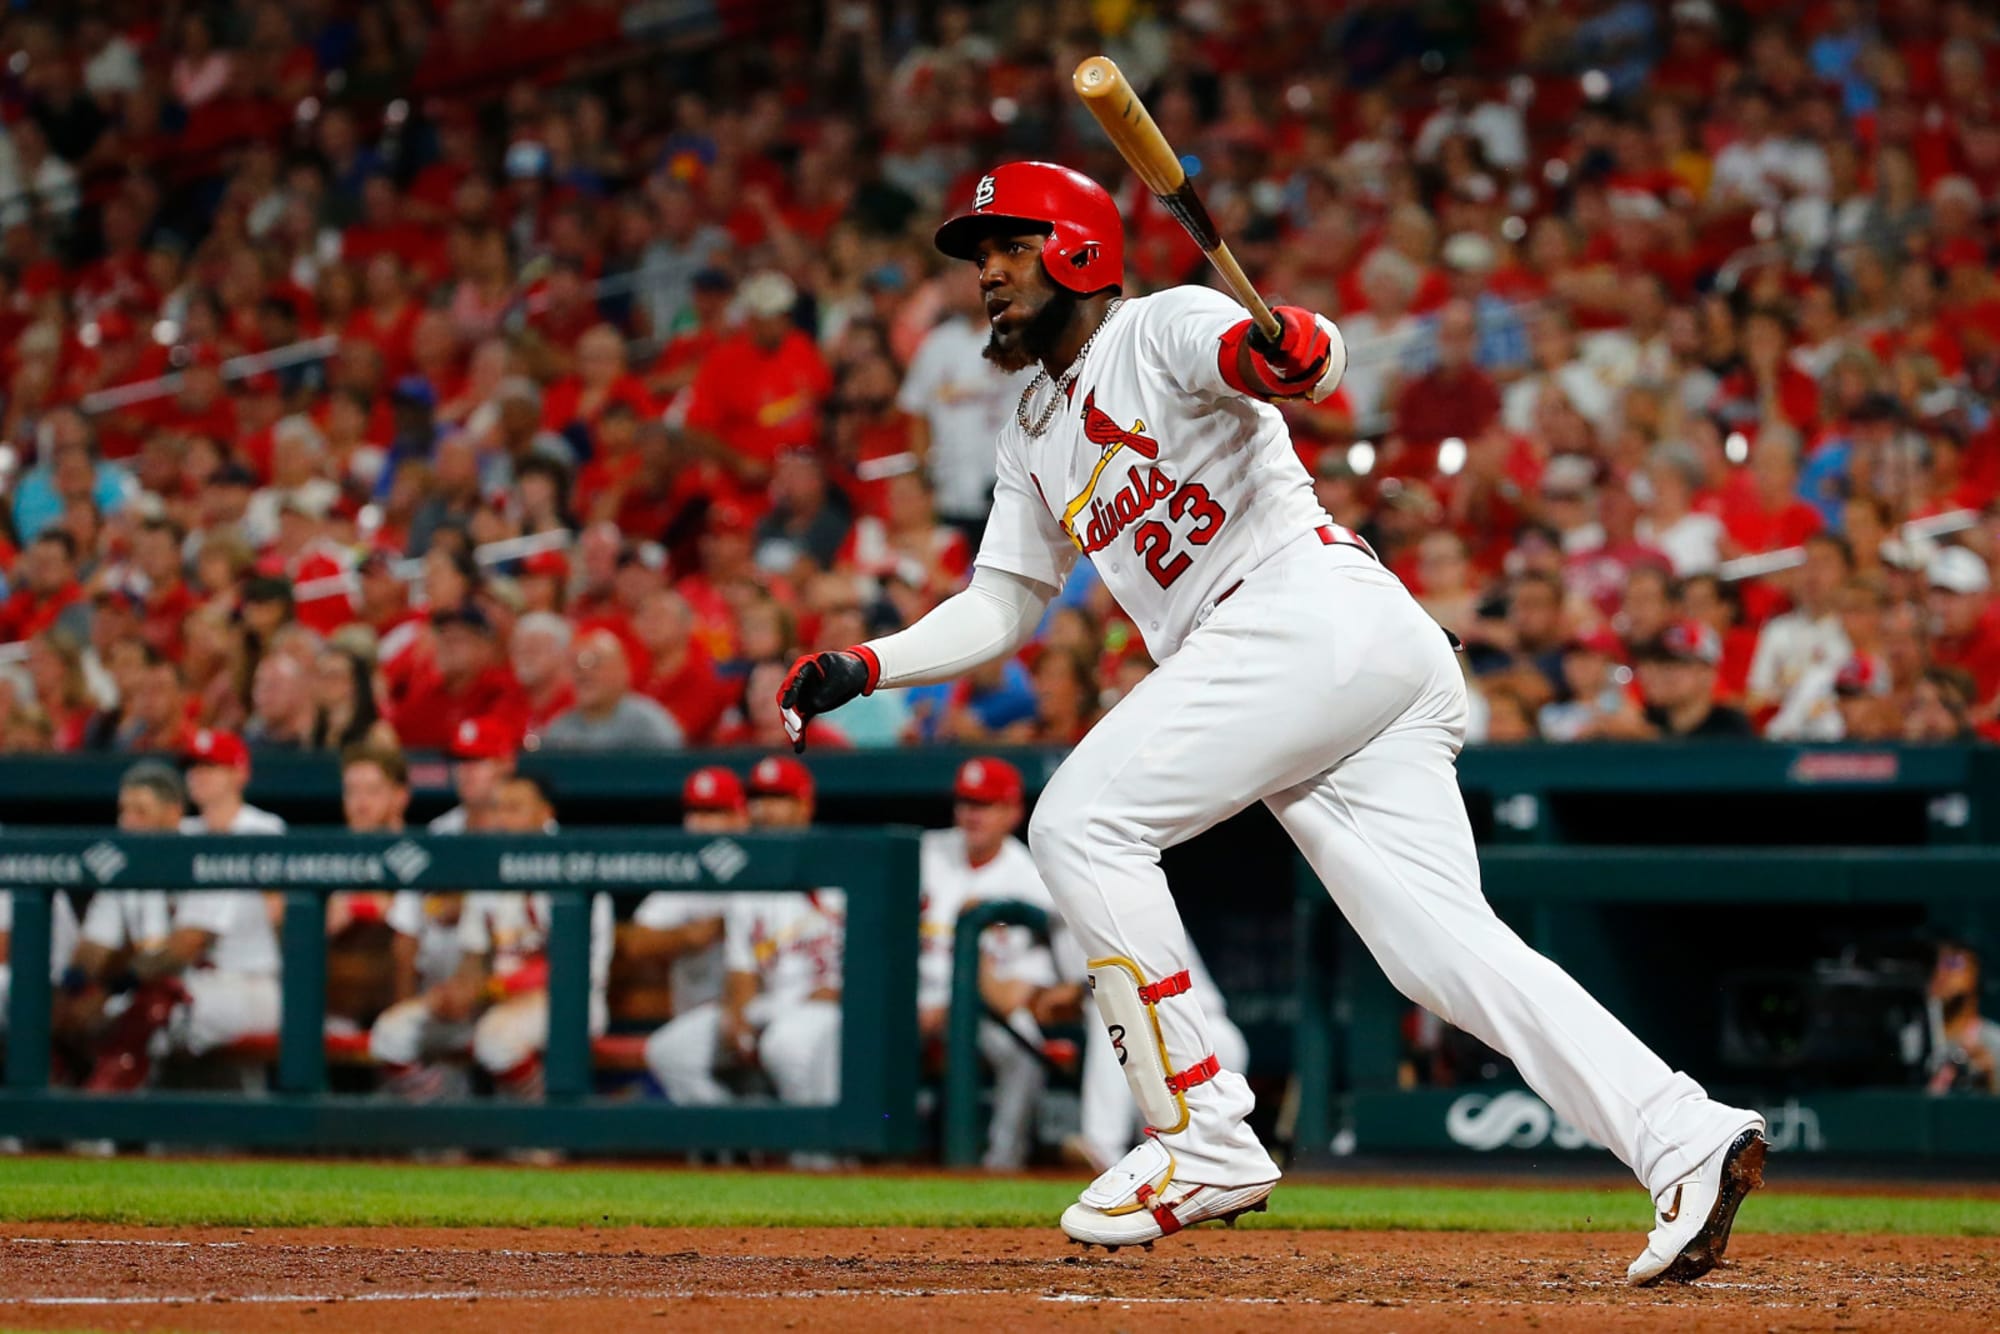 Atlanta Braves: Marcell Ozuna doesn't need to be Donaldson, he needs to be himself